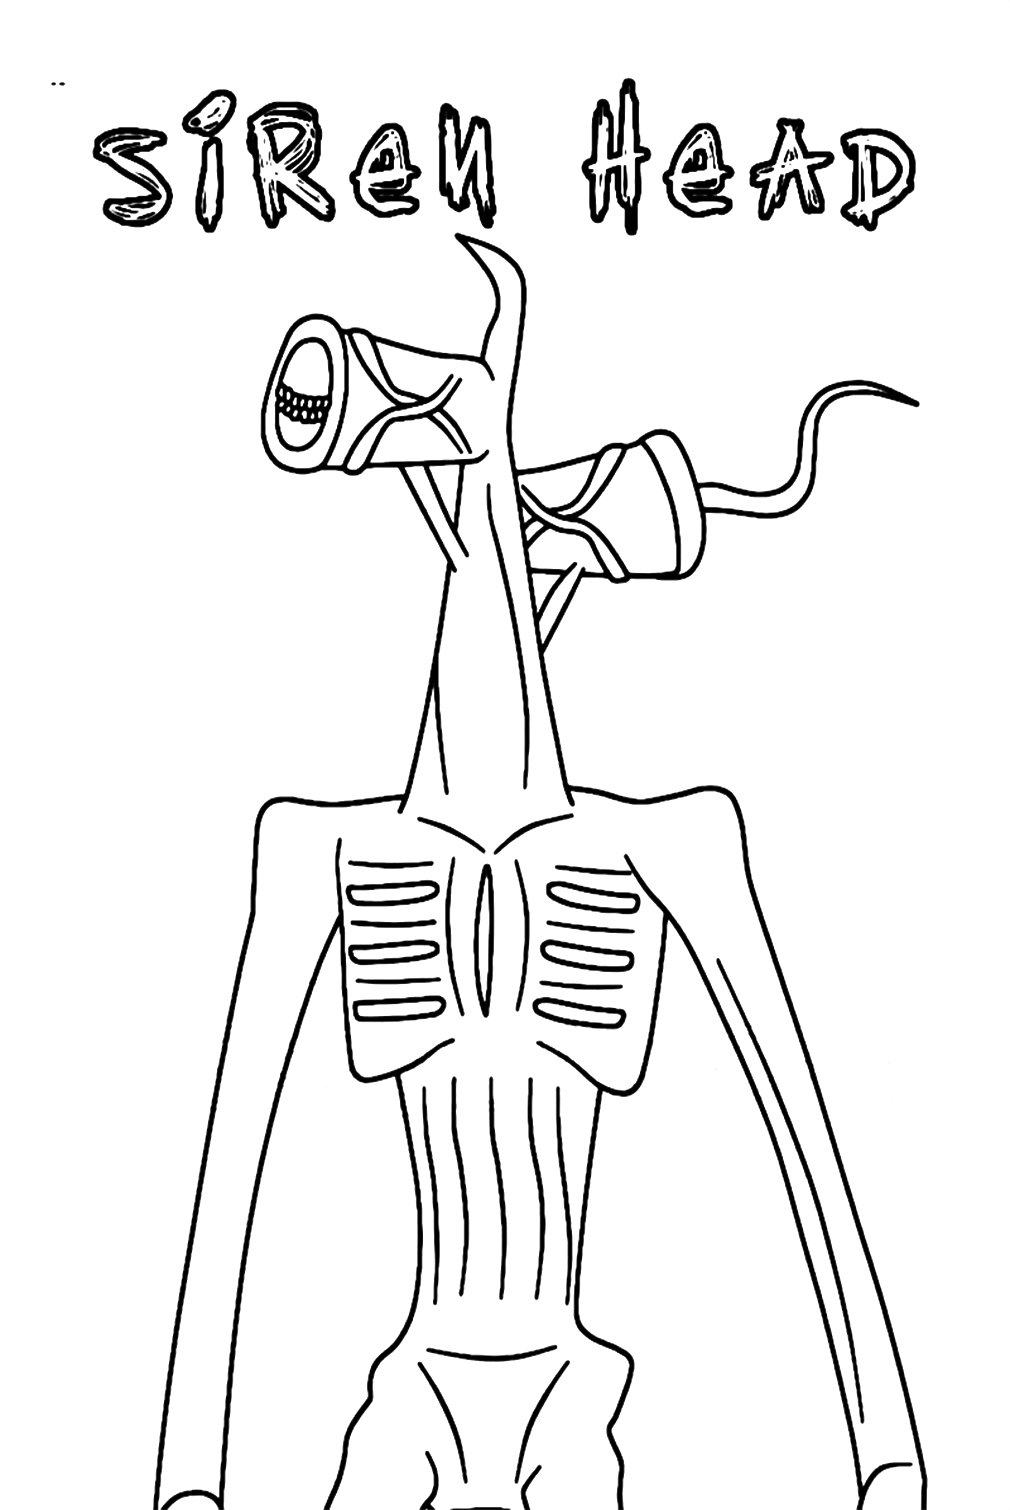 Scary Siren Head Coloring Page